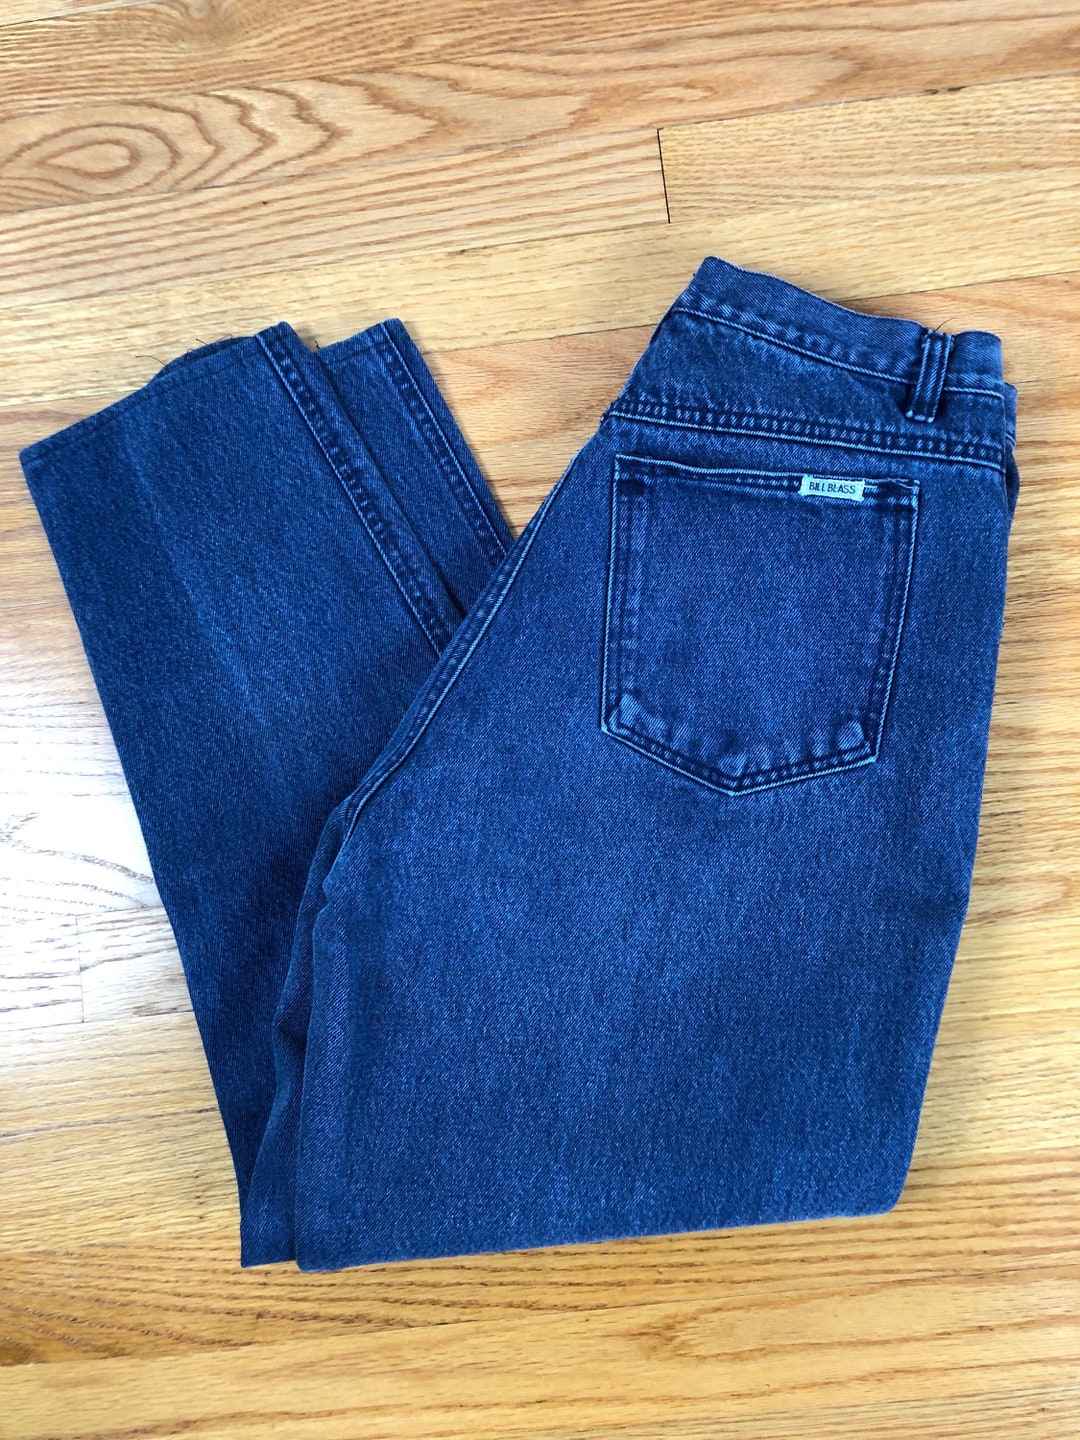 Vintage Bill Blass Jeans 80s High Waisted Tapered Leg Faded - Etsy